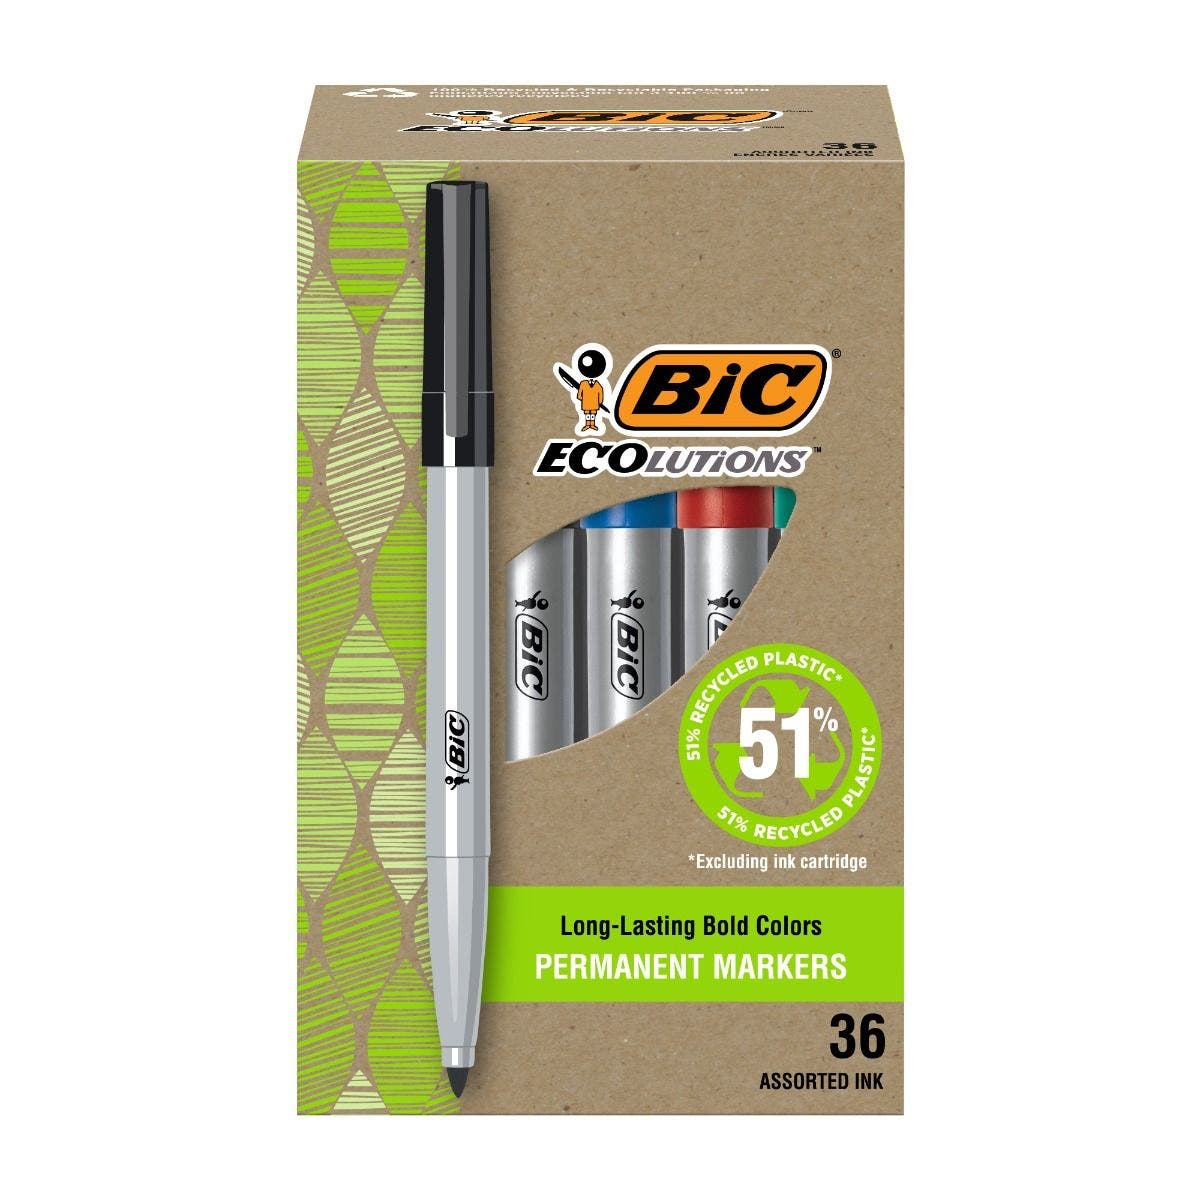 Bic Intensity Fine Permanent Marker Review — The Pen Addict